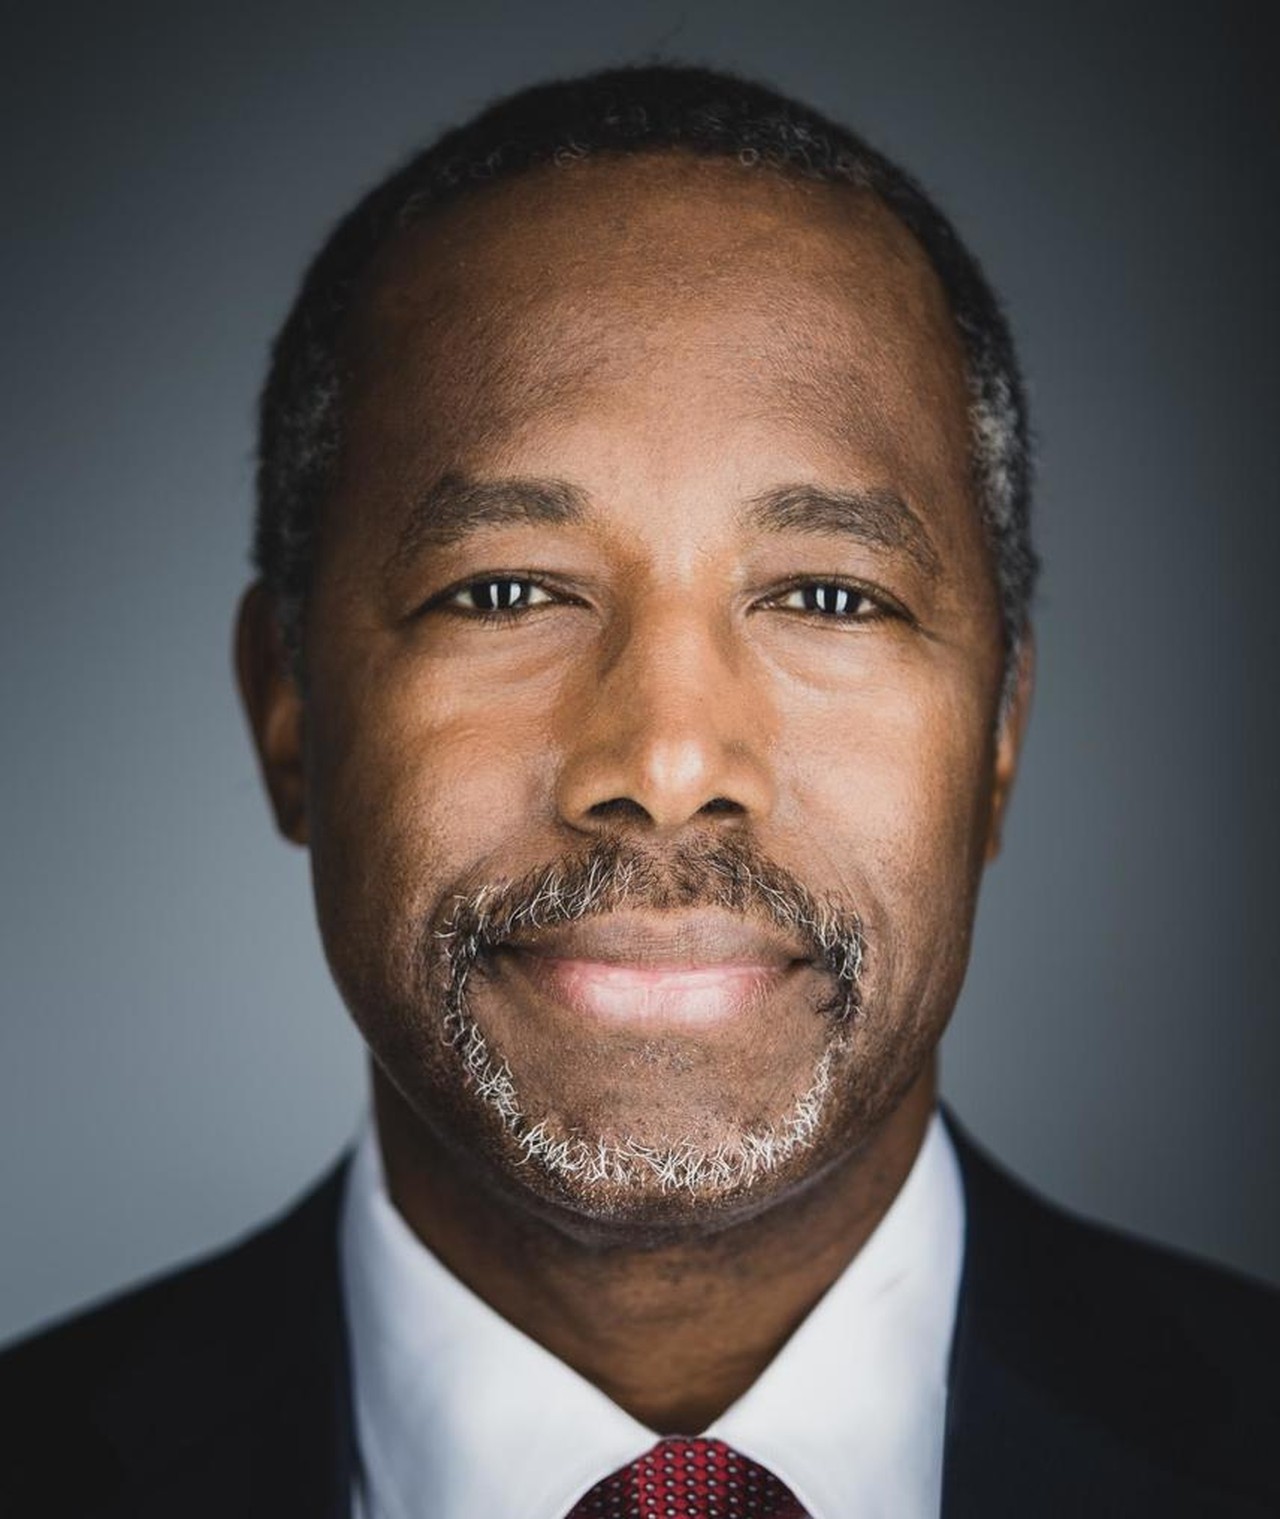 Ben Carson Movies, Bio and Lists on MUBI